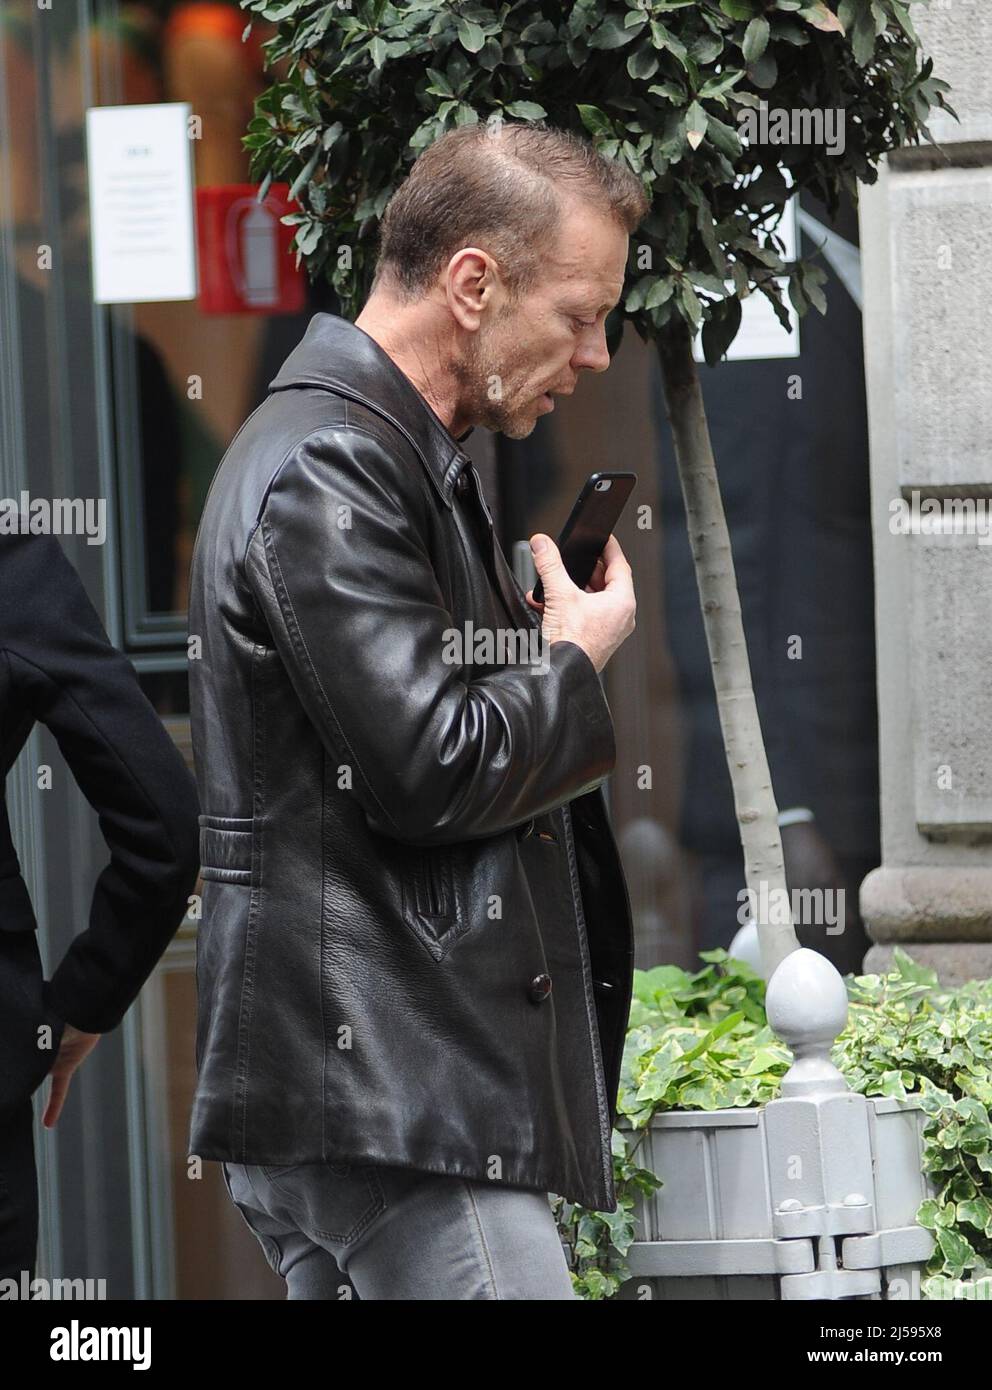 Milan, . 21st Apr, 2022. Milan, 21-04-2022 Rocco Siffredi after having  lunch with his wife ROSA CARACCIOLO at the "Salumaio di Montenapoleone"  takes a walk along the streets of the quadrilateral, then